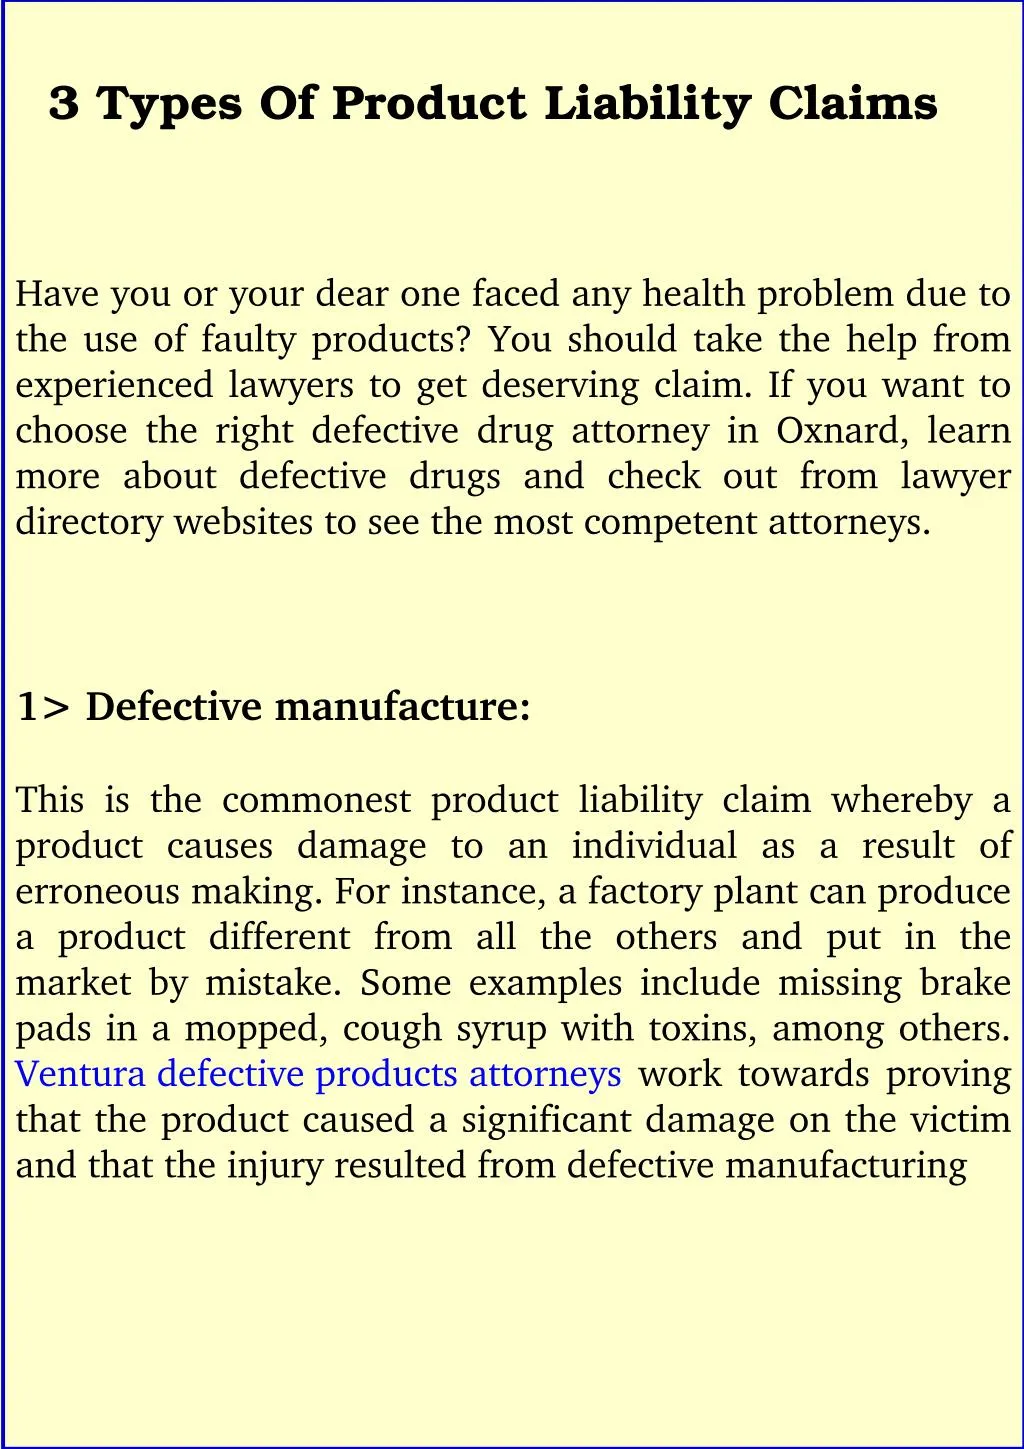 3 types of product liability claims